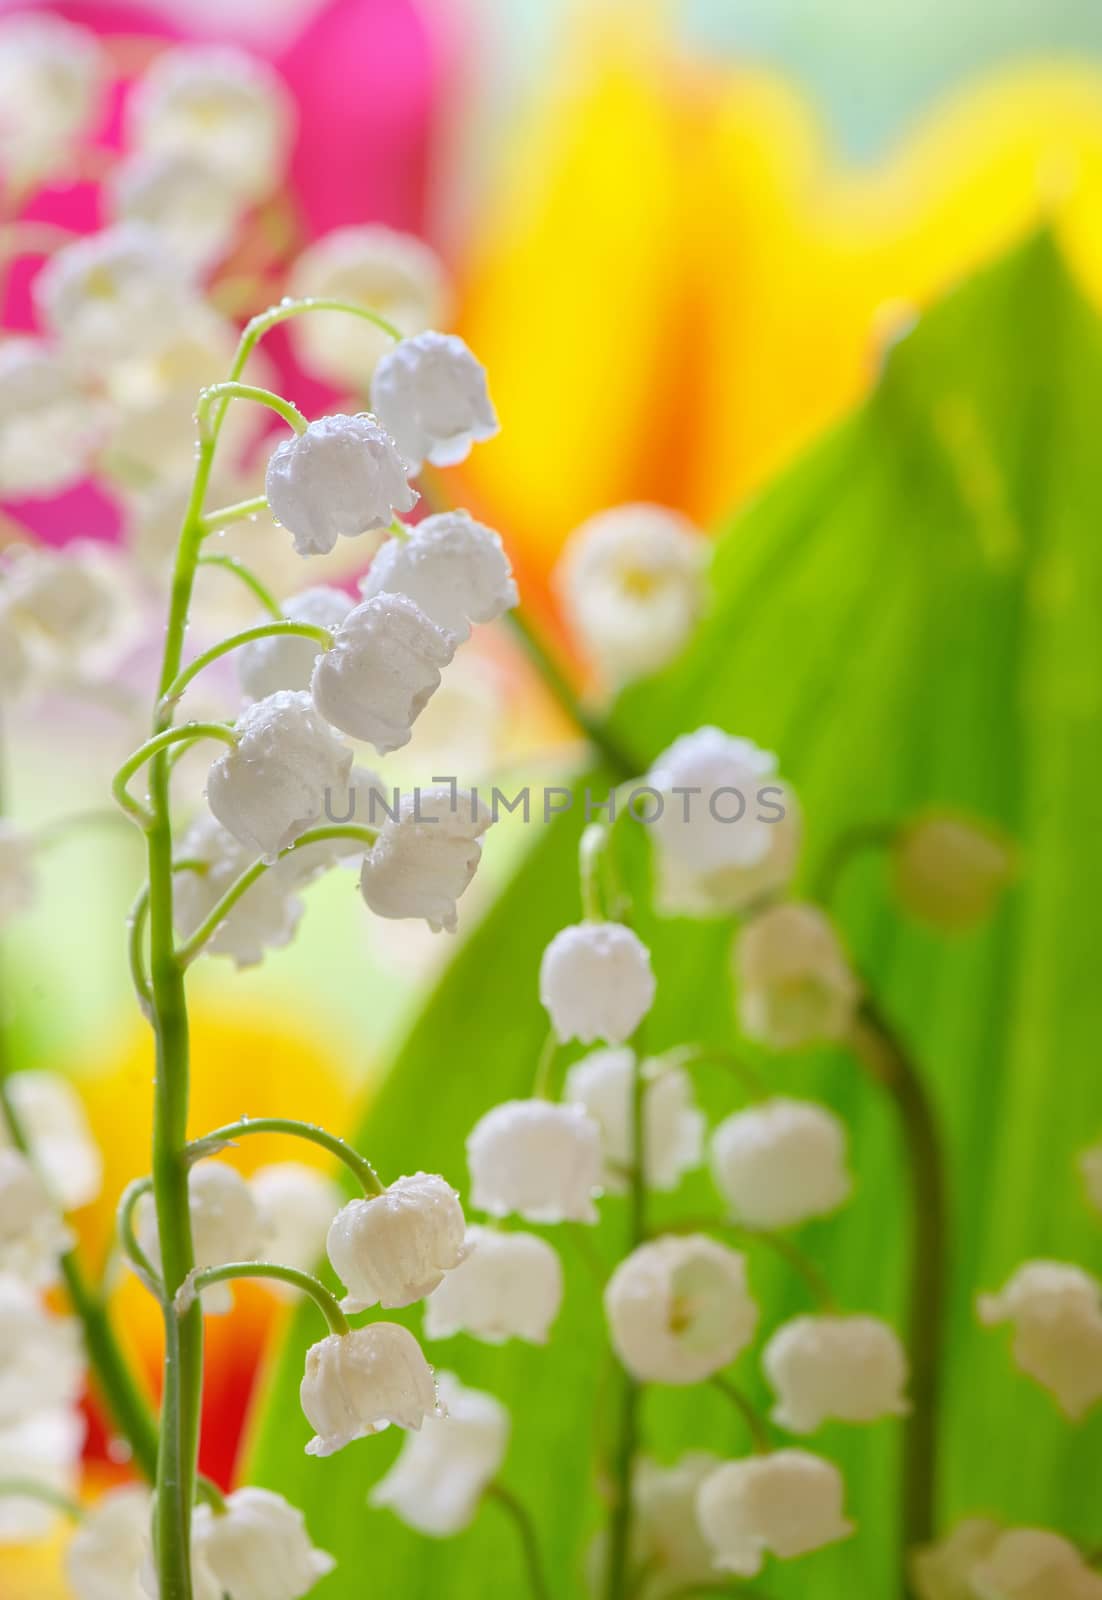 Lily of the valley (convallaria majalis) by mady70